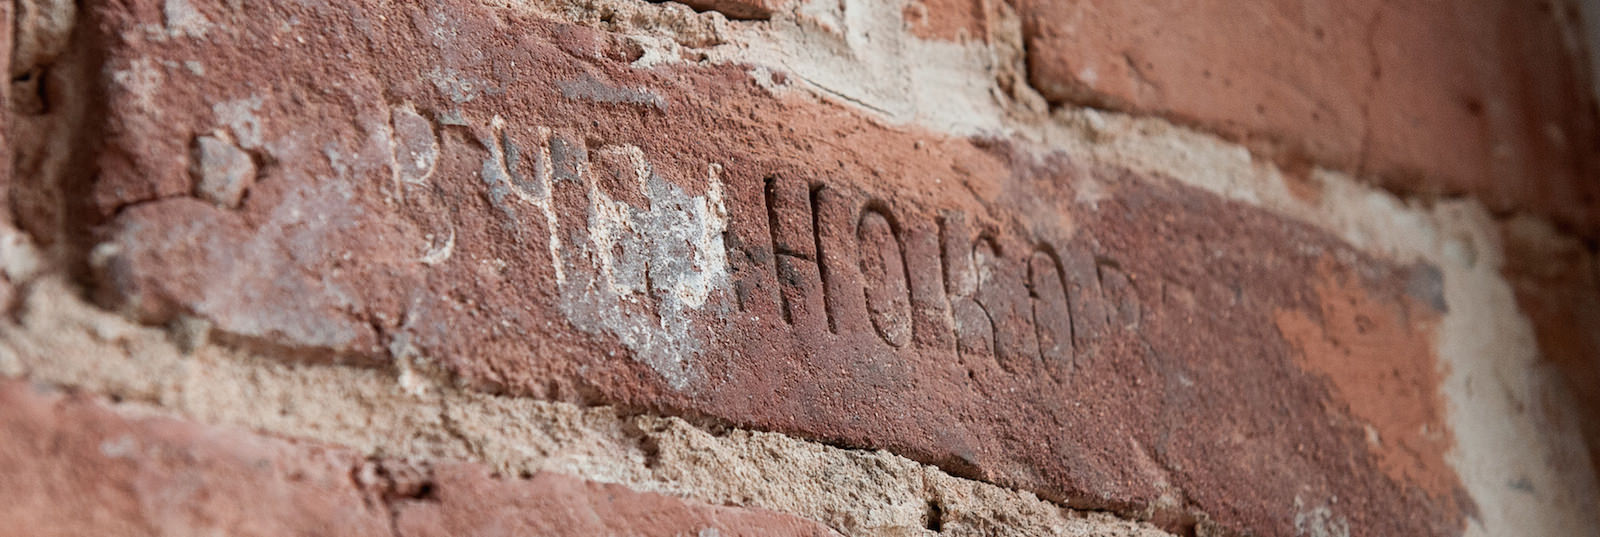 Brick with ‘V. Chelnokov’ stamp on the second-floor wall of the building. The Chelnokov Brick Factory was one of the largest in the late 19th century